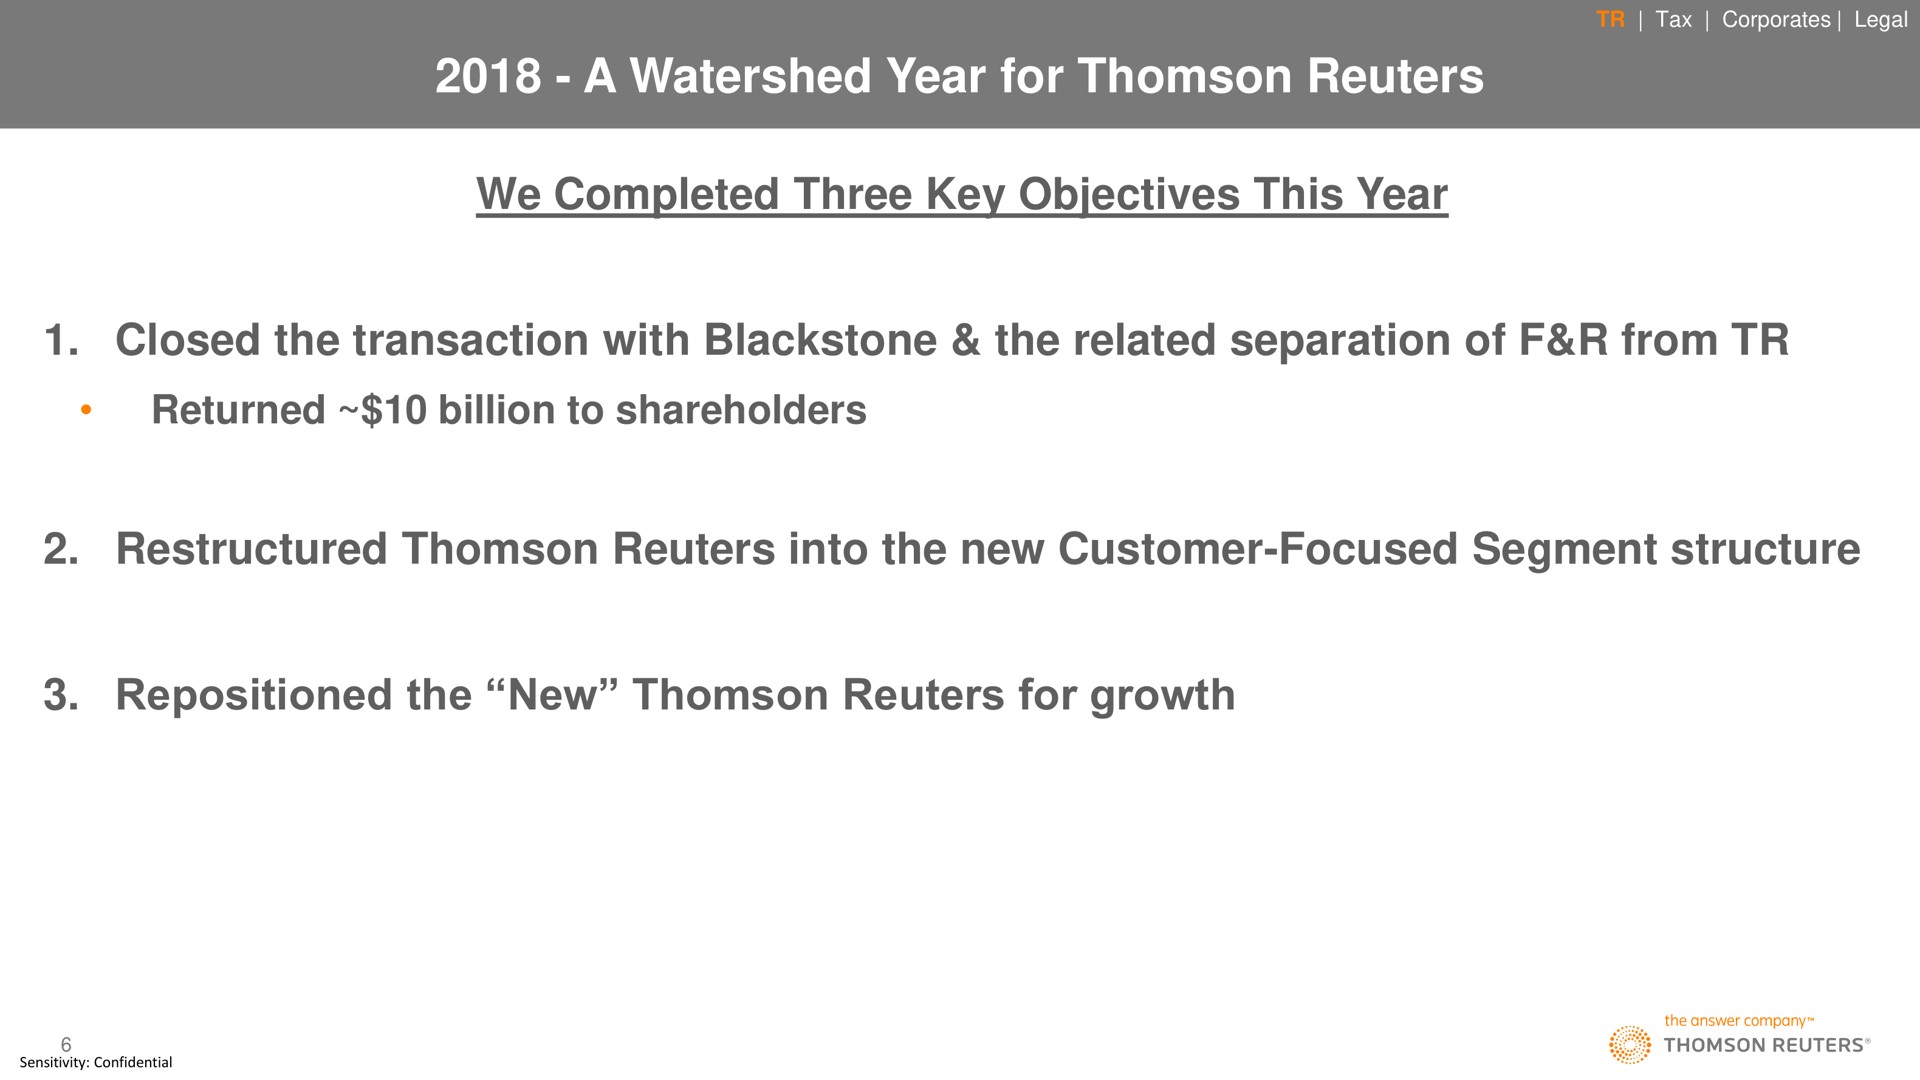 a watershed year for we completed three key objectives this year closed the transaction with the related separation of from returned billion to shareholders into the new customer focused segment structure repositioned the new for growth | Thomson Reuters